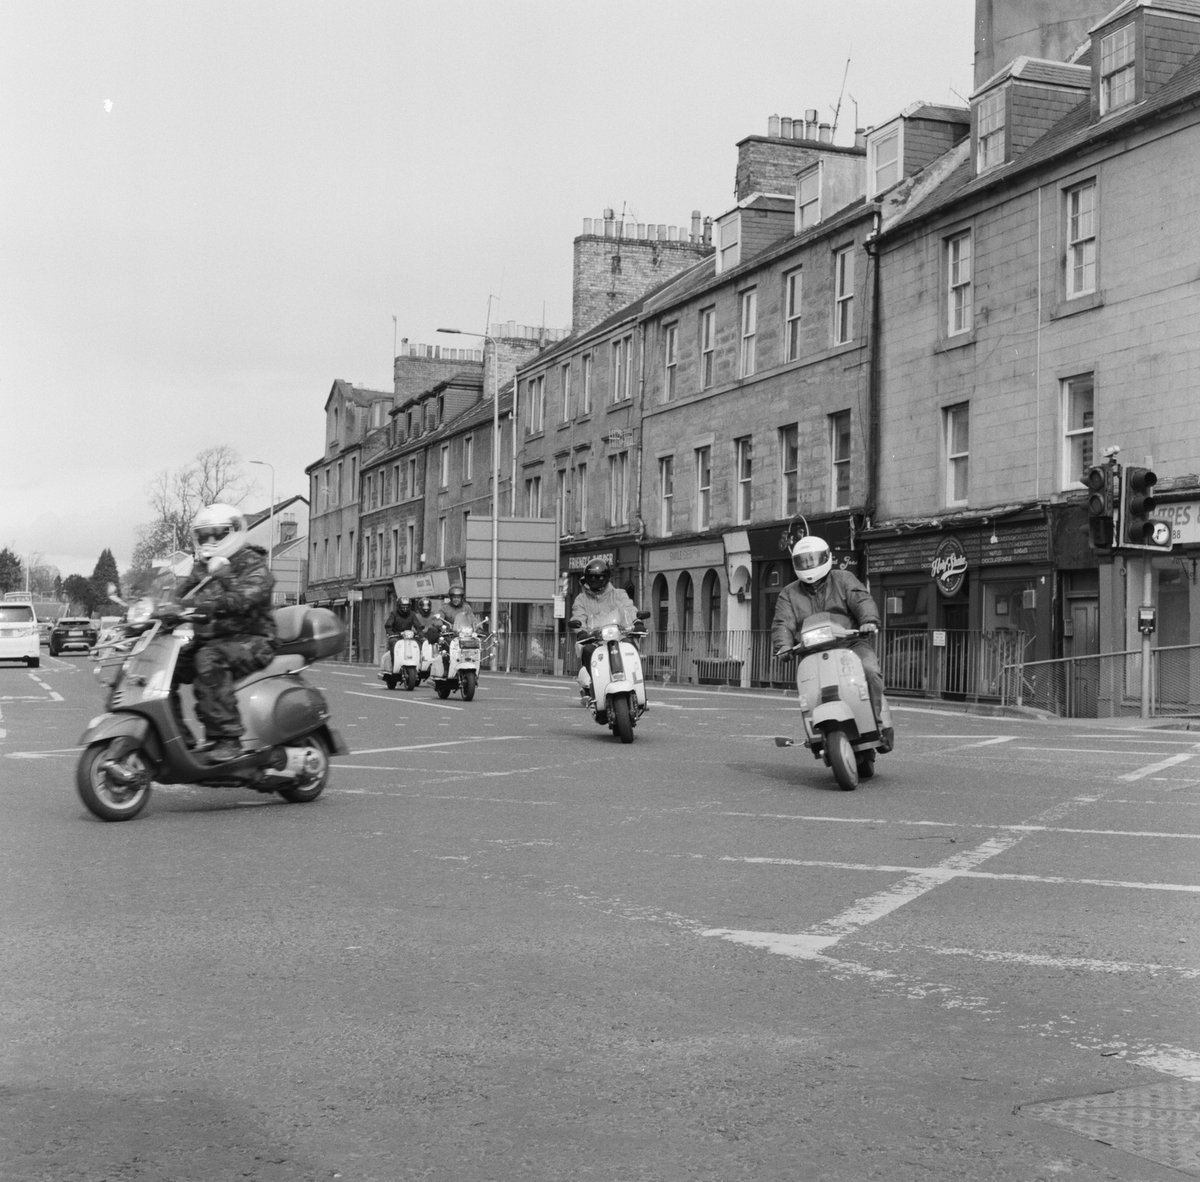 Scooters, Bridgend, Perth, April 2024

Camera: Mamiya C220
Film: Ilford HP5+
Dev & Scan: AG Photolab

#believeinfilm 
#filmphotography
#ilfordHP5
#scooters